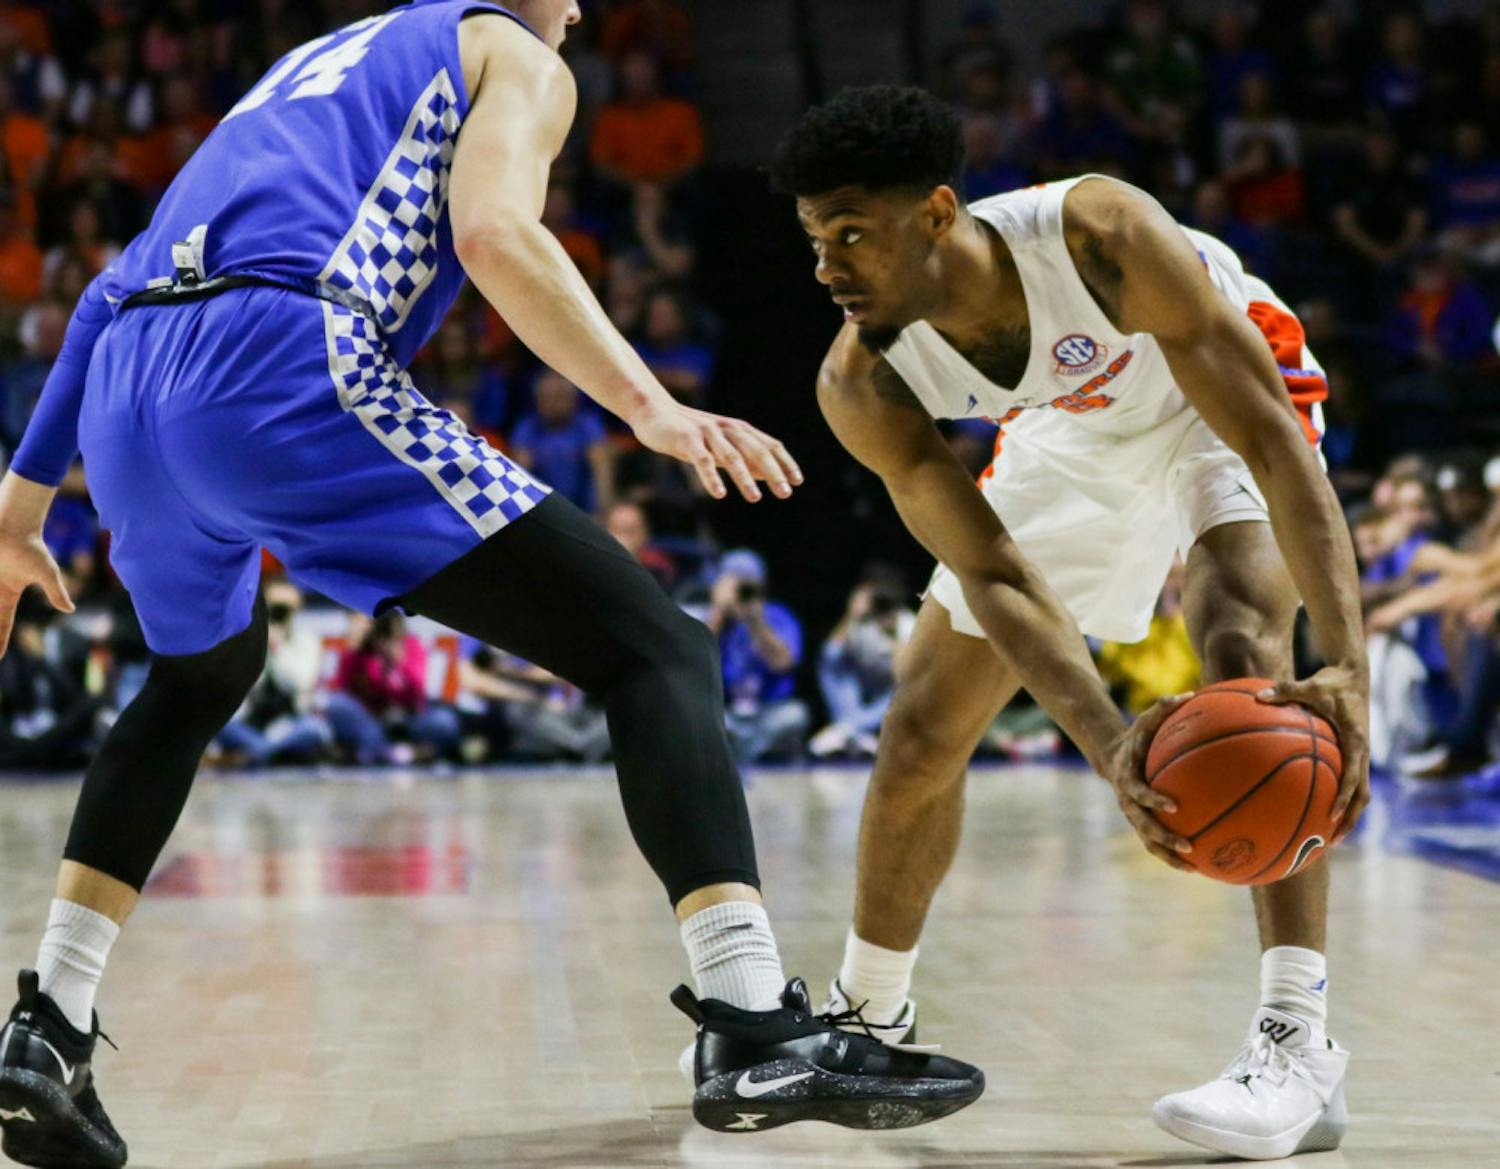 Florida guard Jalen Hudson scored 15 points on 5-of-12 shooting in UF's 73-61 loss to Tennessee on Saturday.
&nbsp;